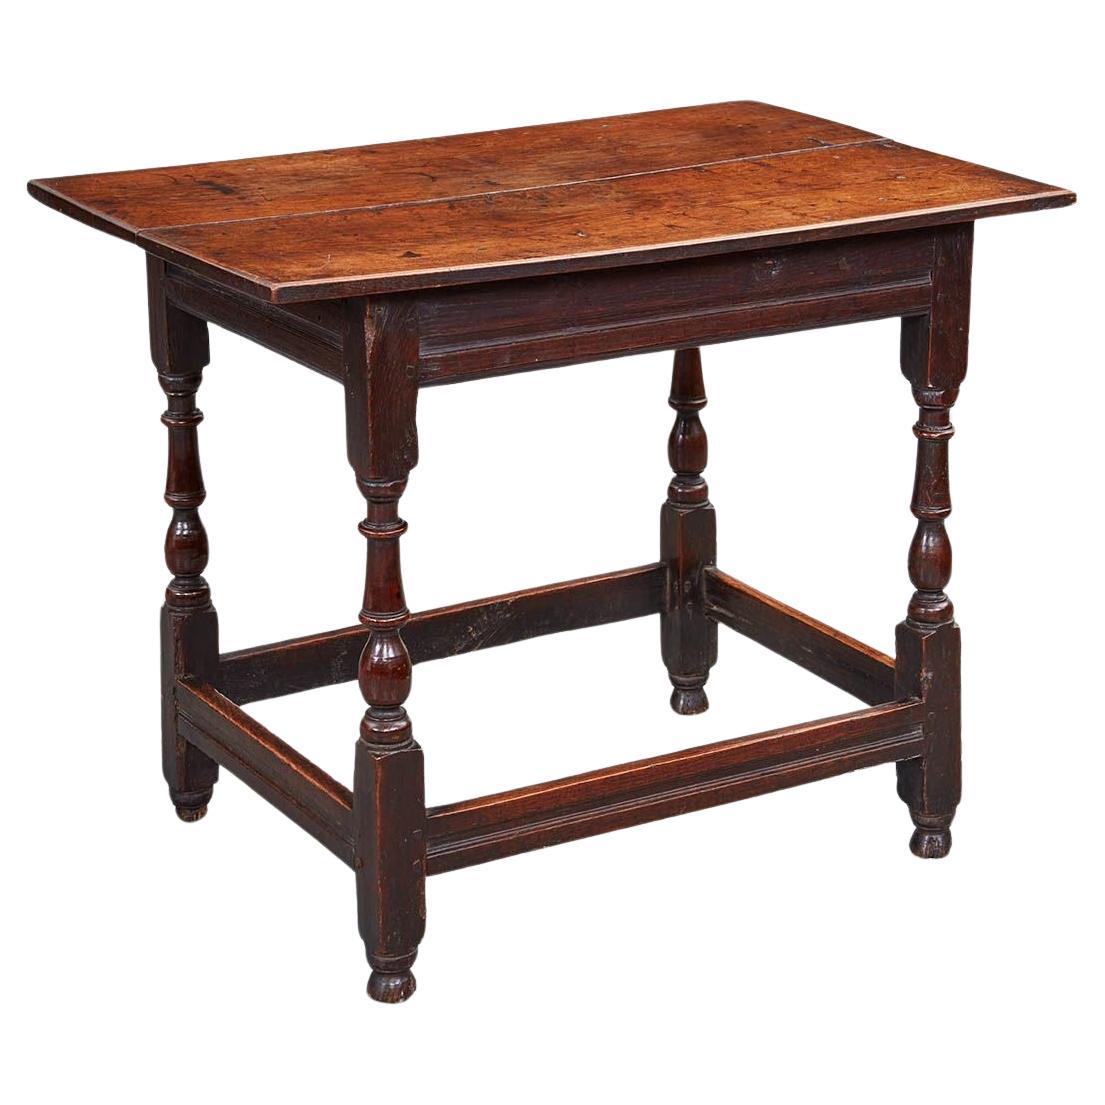 Early 18th c. Box Stretcher Center Table